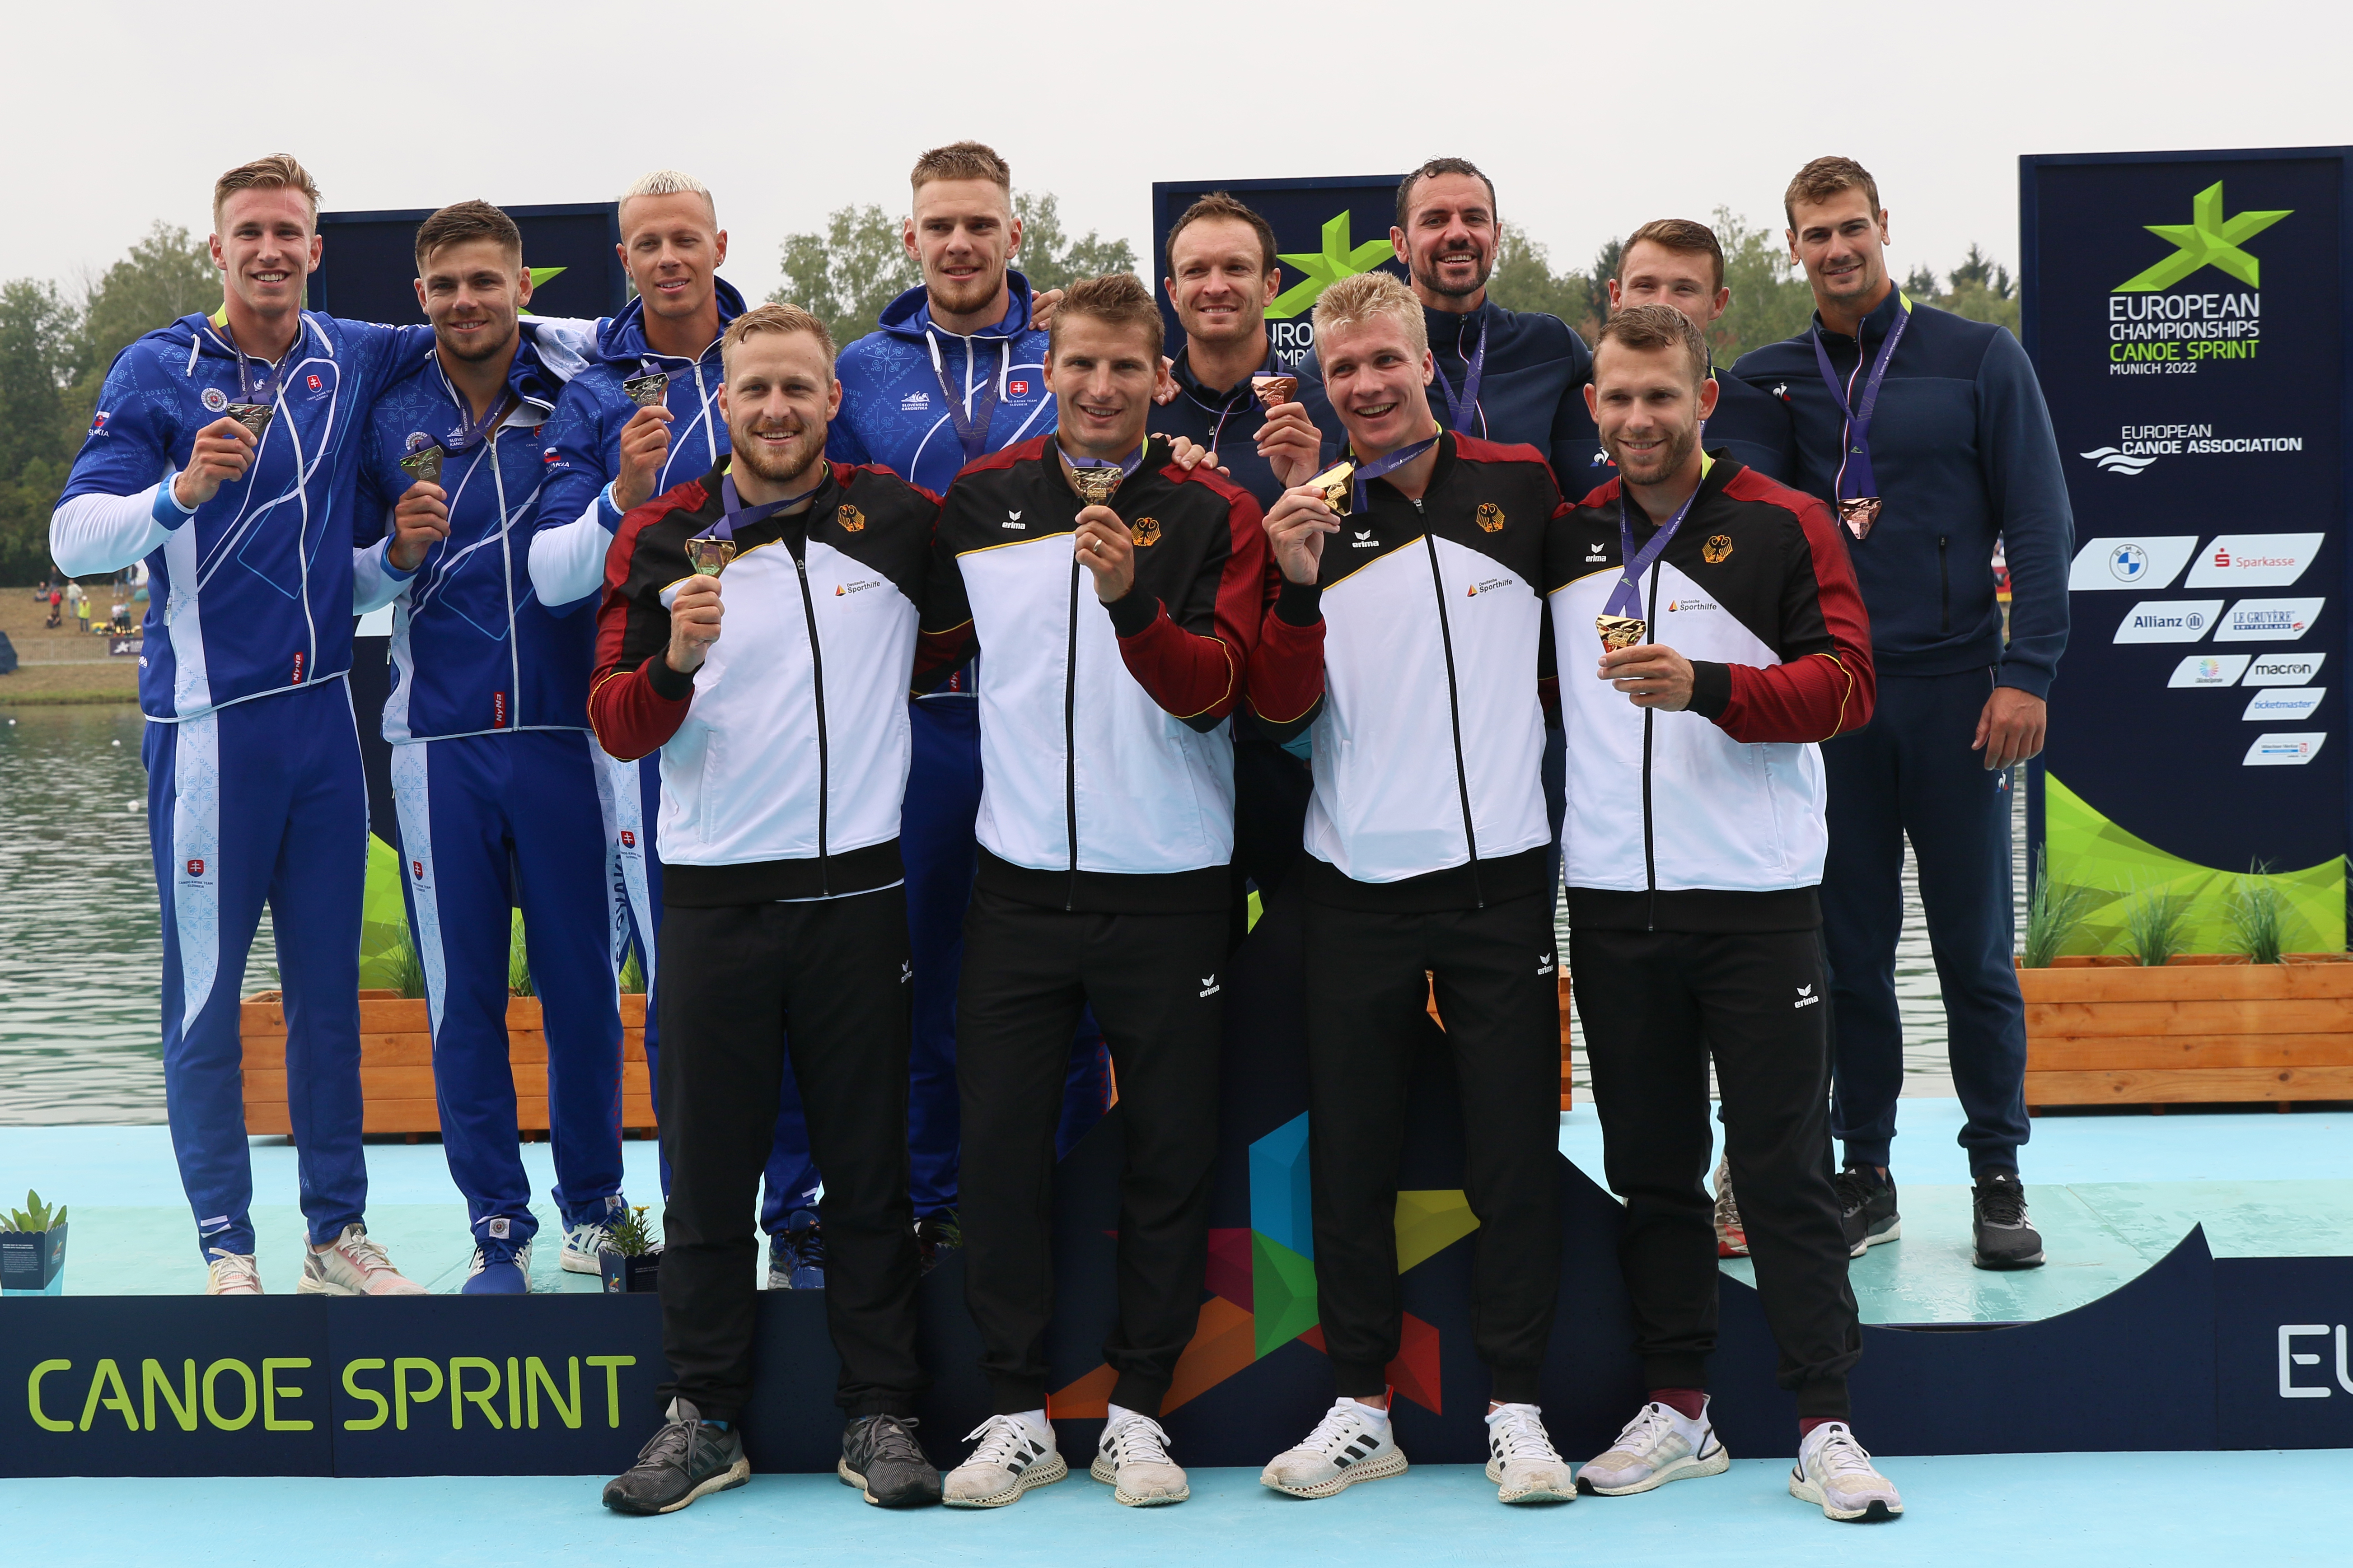 Men’s kayak four one of the highlights of the Canoe Sprint at European Games 2023